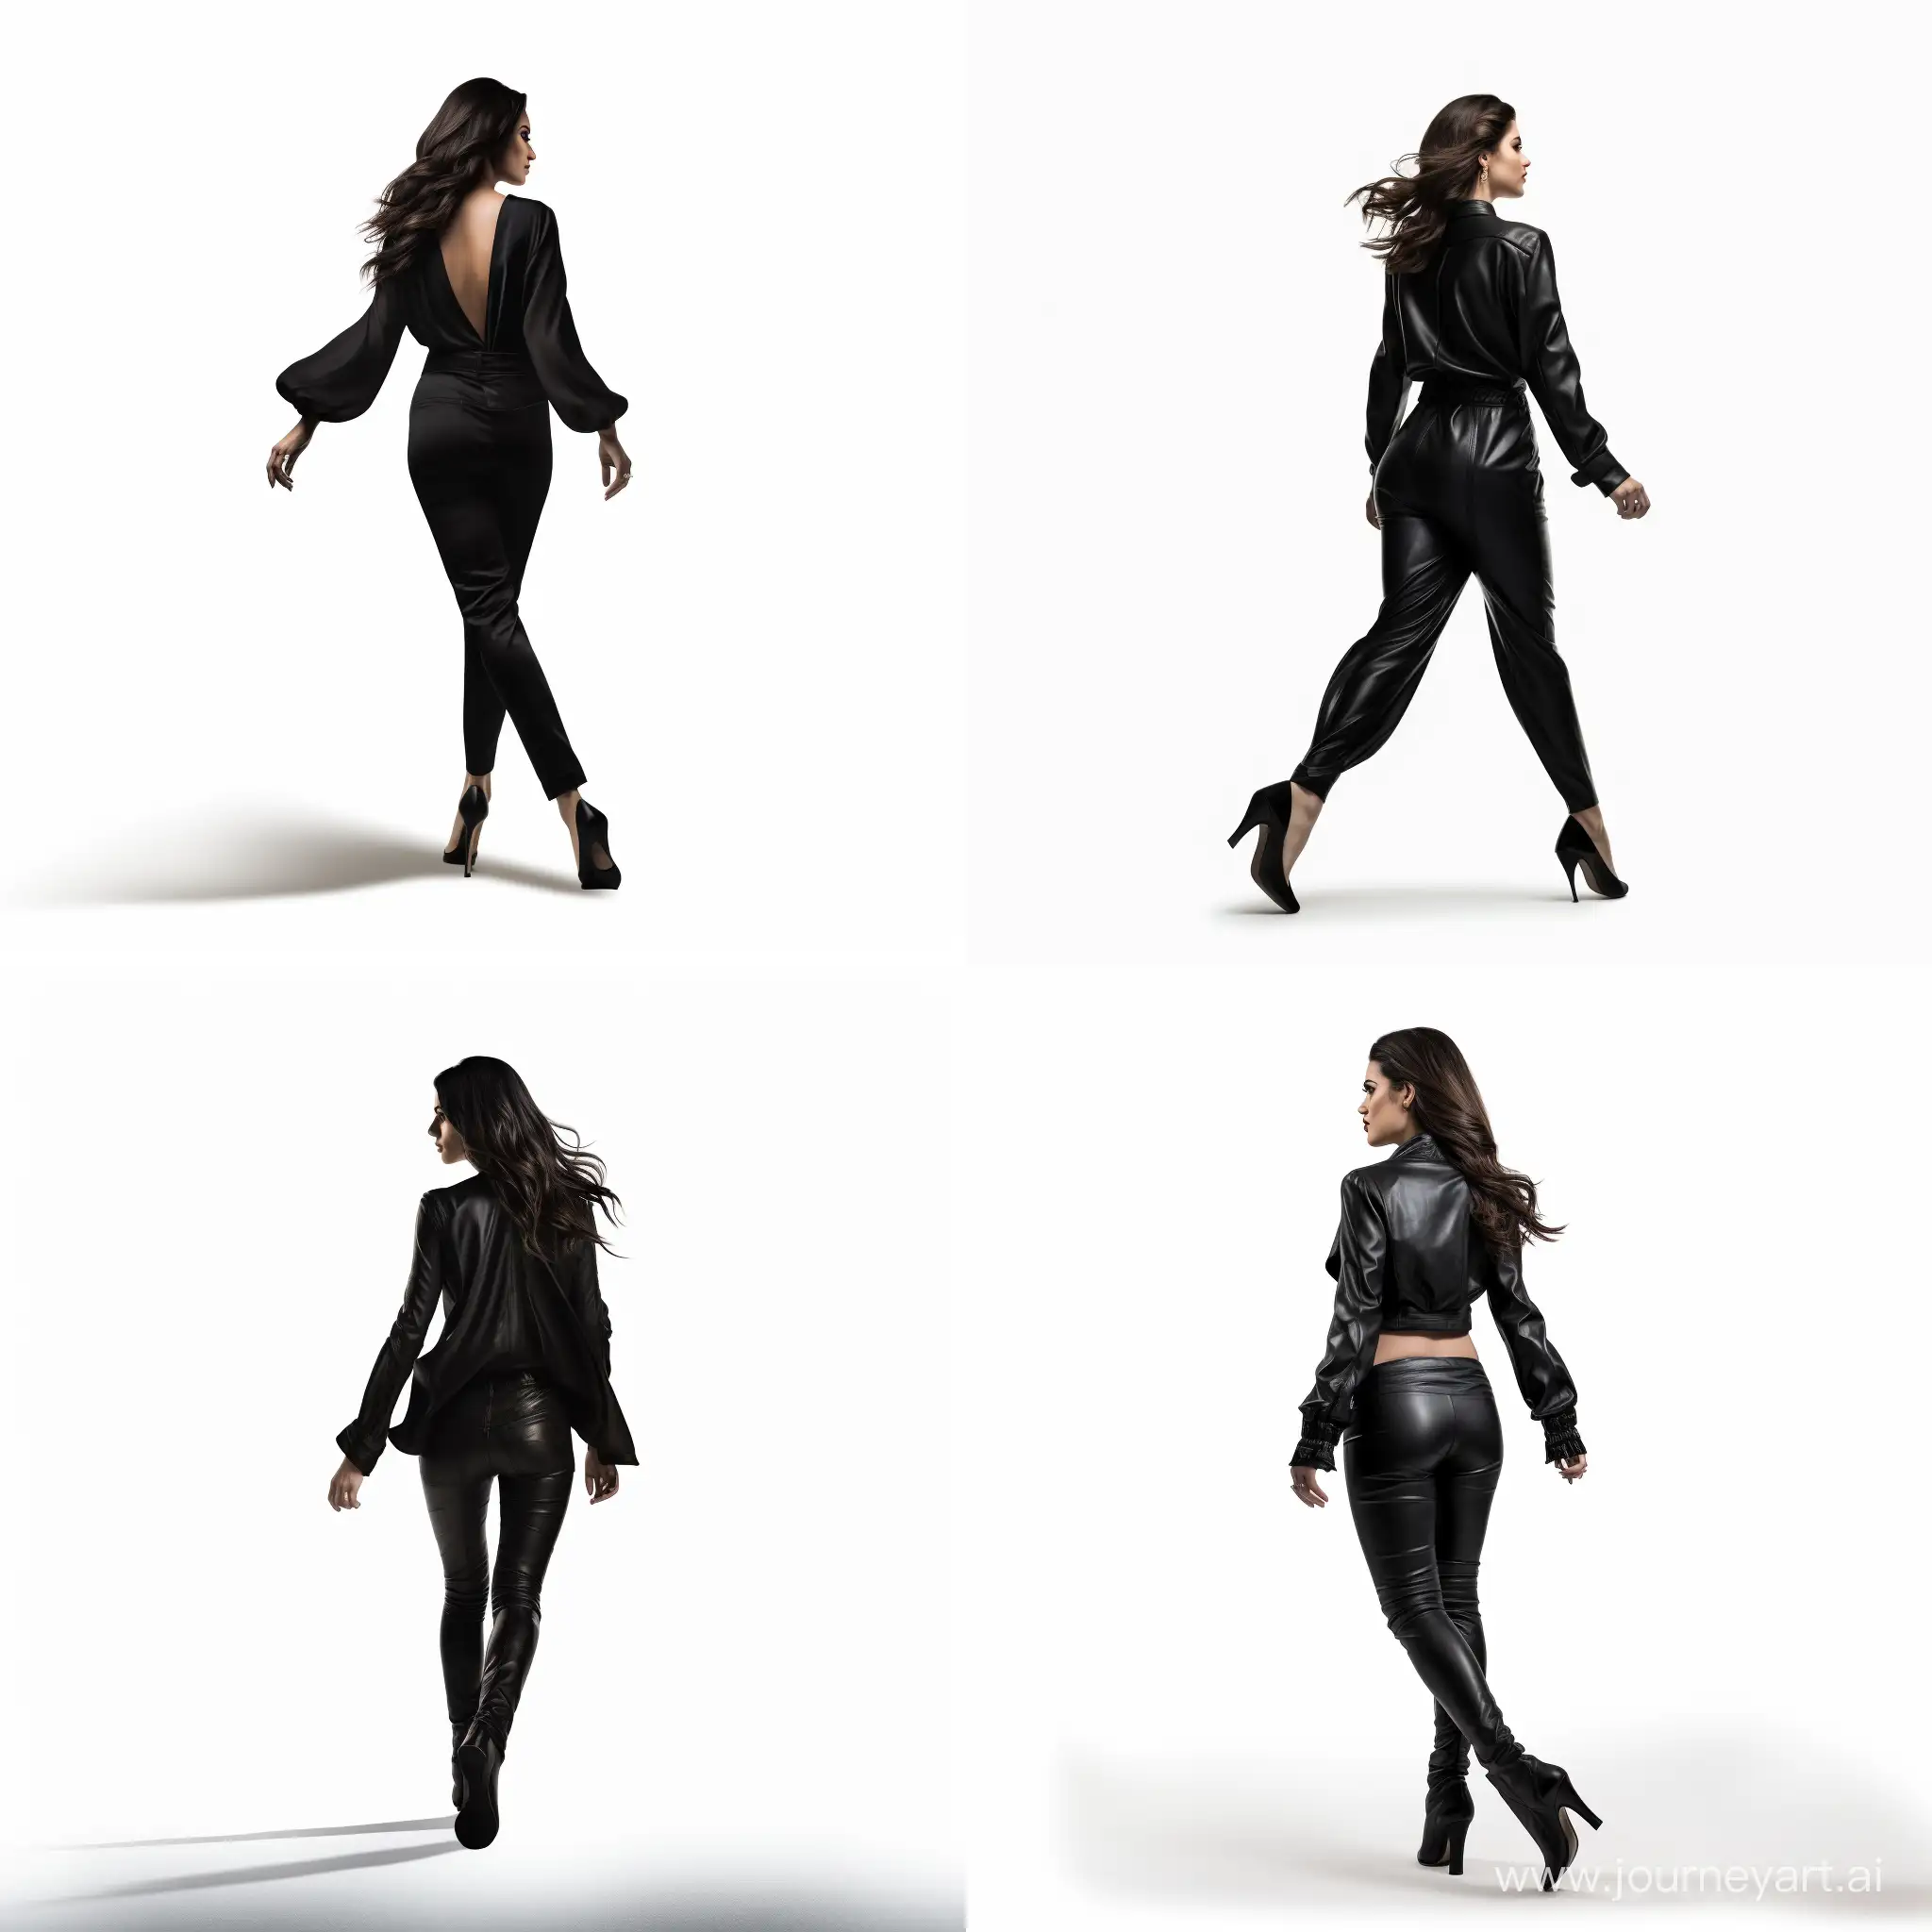 Confident-Woman-Striding-in-Stylish-Black-Outfit-with-Extended-Arms